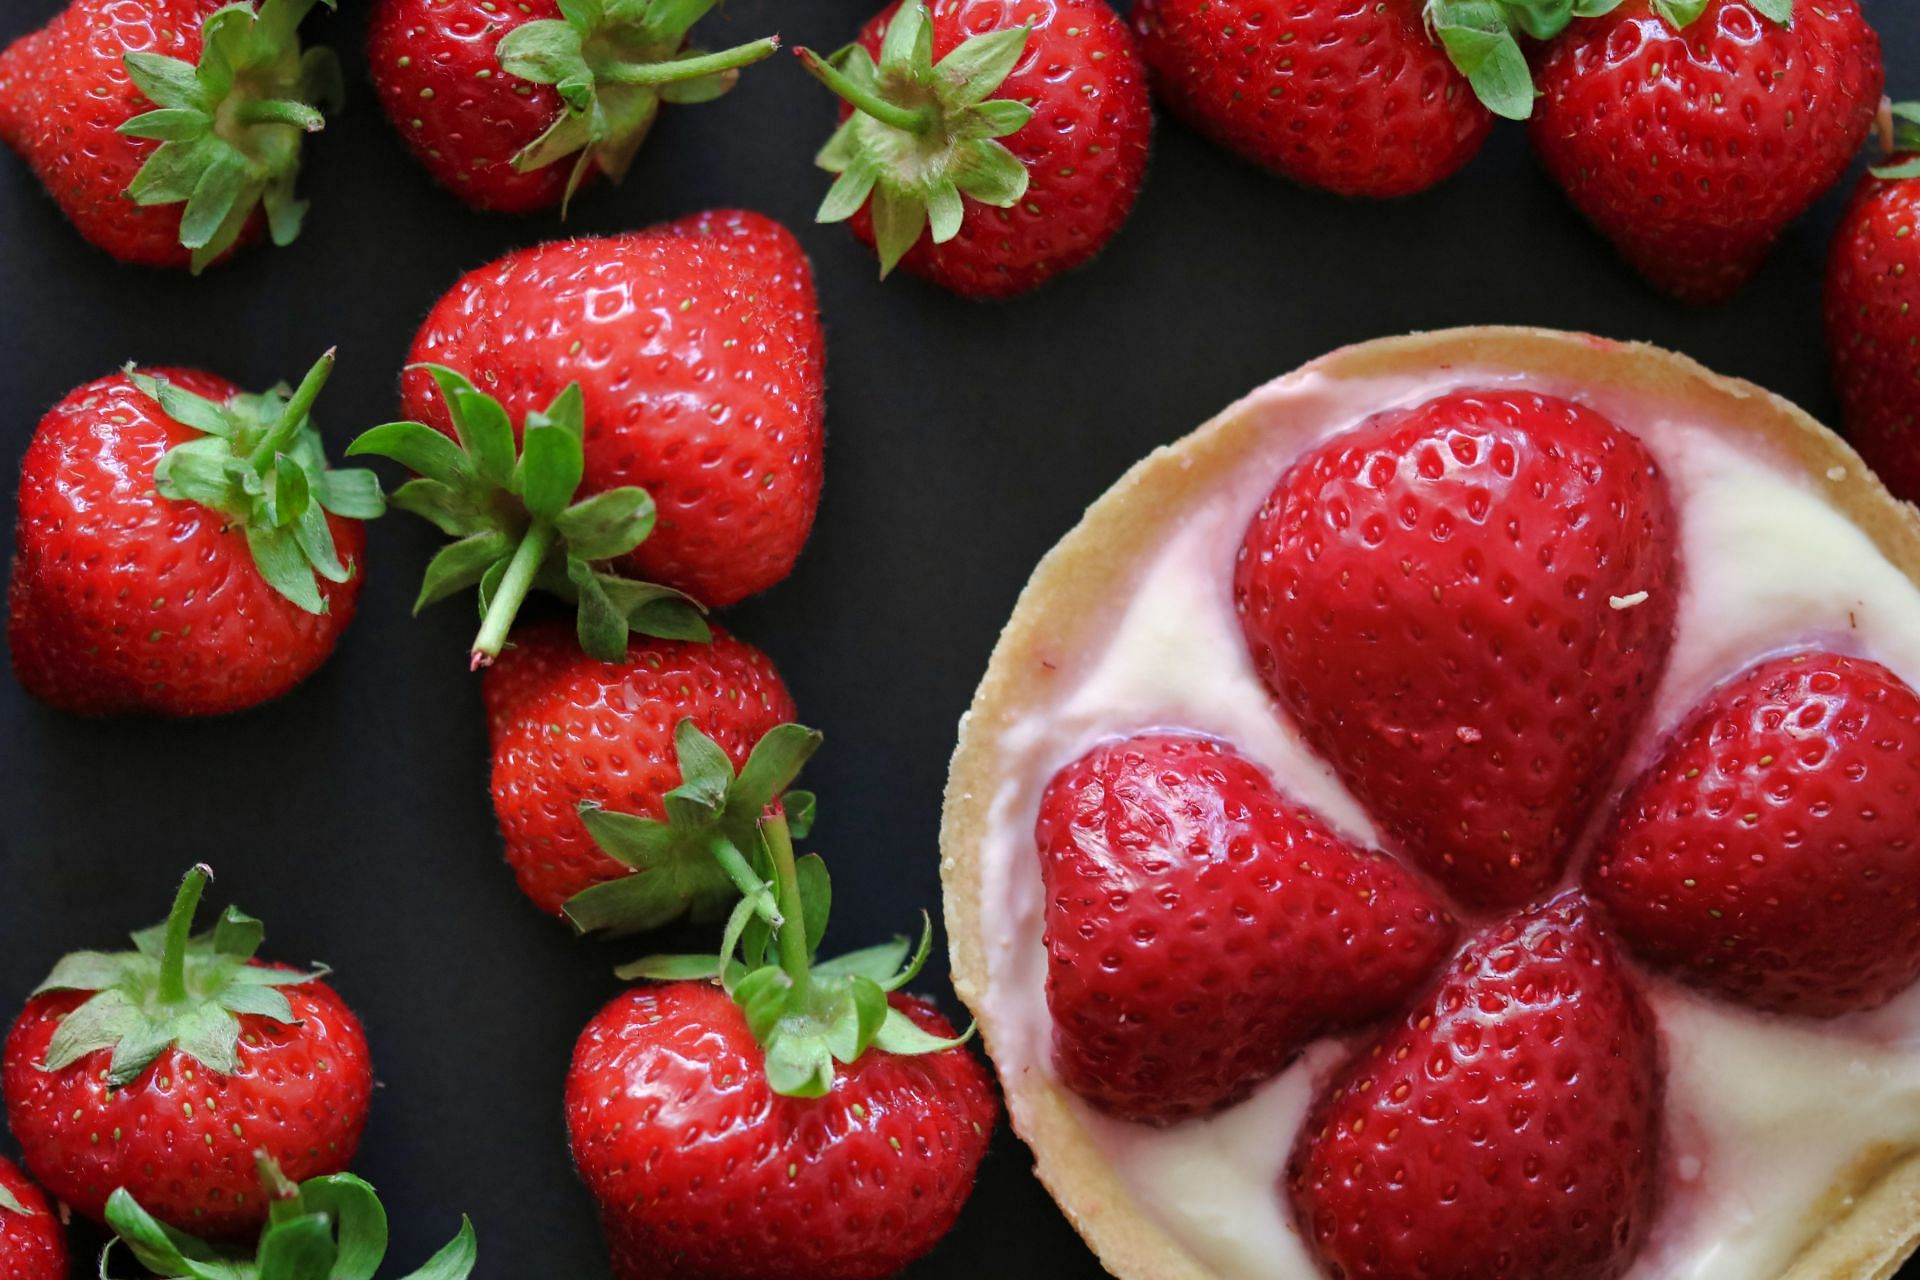 Strawberries are able to reduce puffiness of the eyes,.(Image via Pexels/Nick Collins)